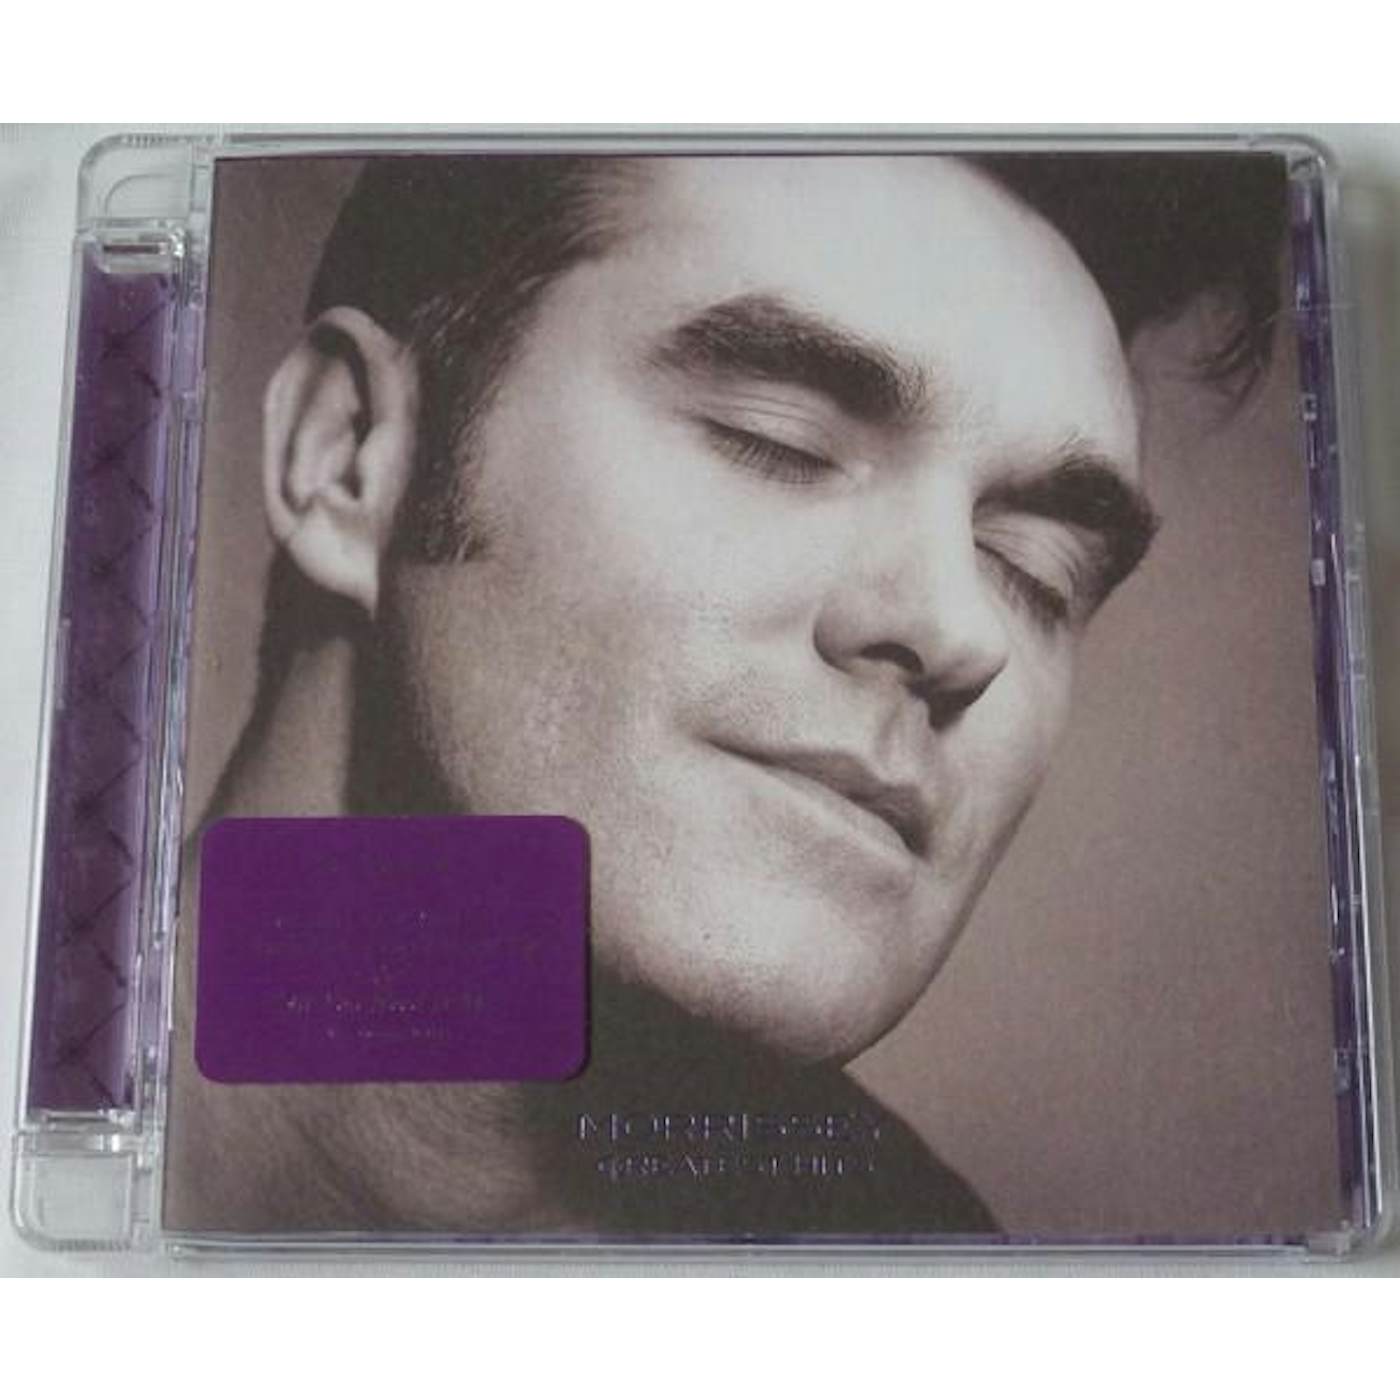 Morrissey GREATEST HITS CD